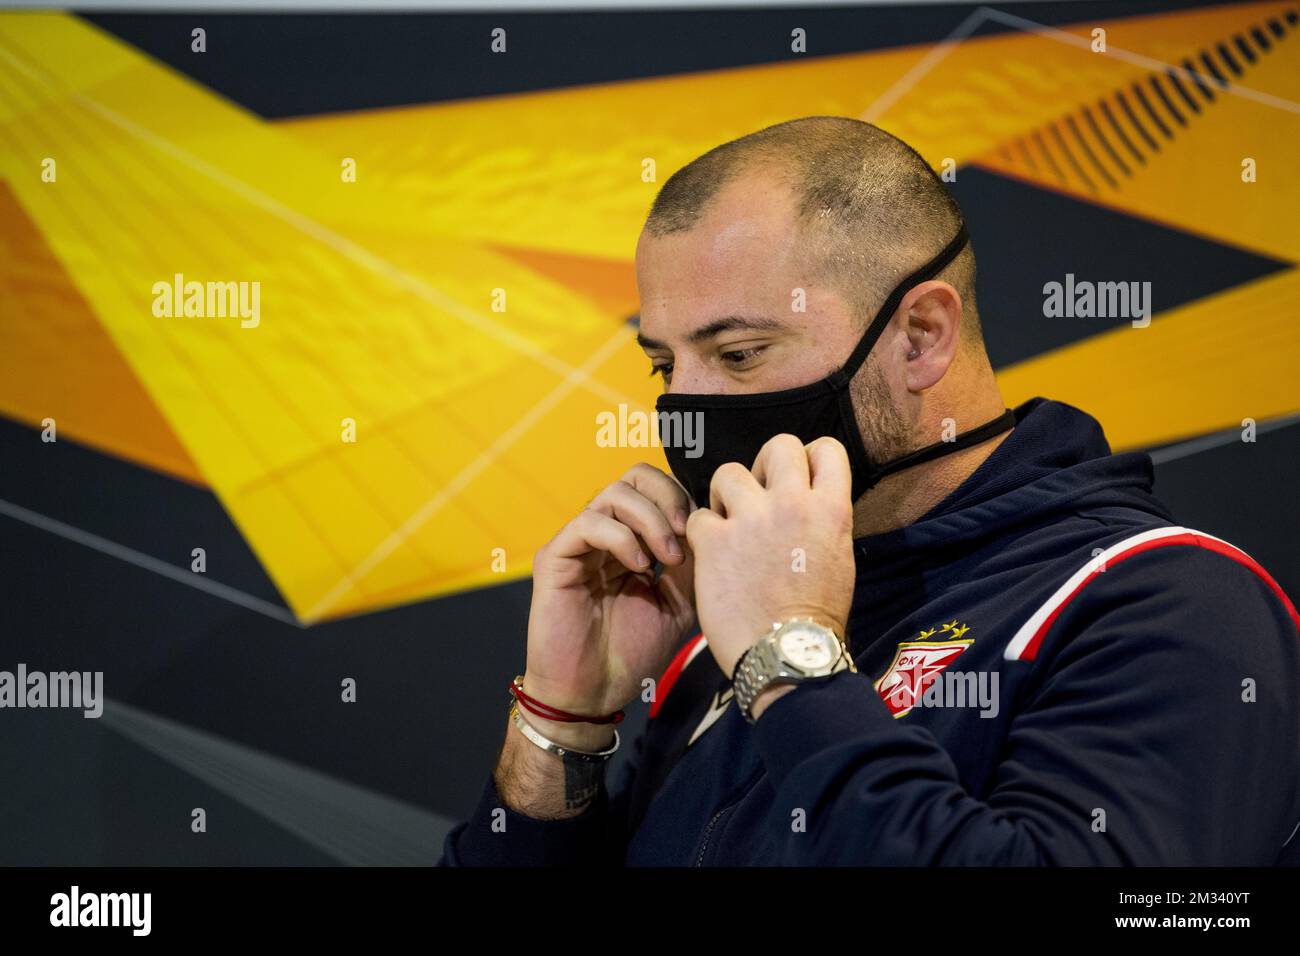 Belgrade's head coach Dejan Stankovic pictured during a press conference of Serbian club Crvena Zvezda (Red Star Belgrade), Wednesday 25 November 2020, in Gent. Tomorrow KAA Gent will meet Serbian club Crvena Zvezda in the fourth day of the group phase (group L) of the UEFA Europa League competition. BELGA PHOTO JASPER JACOBS Stock Photo